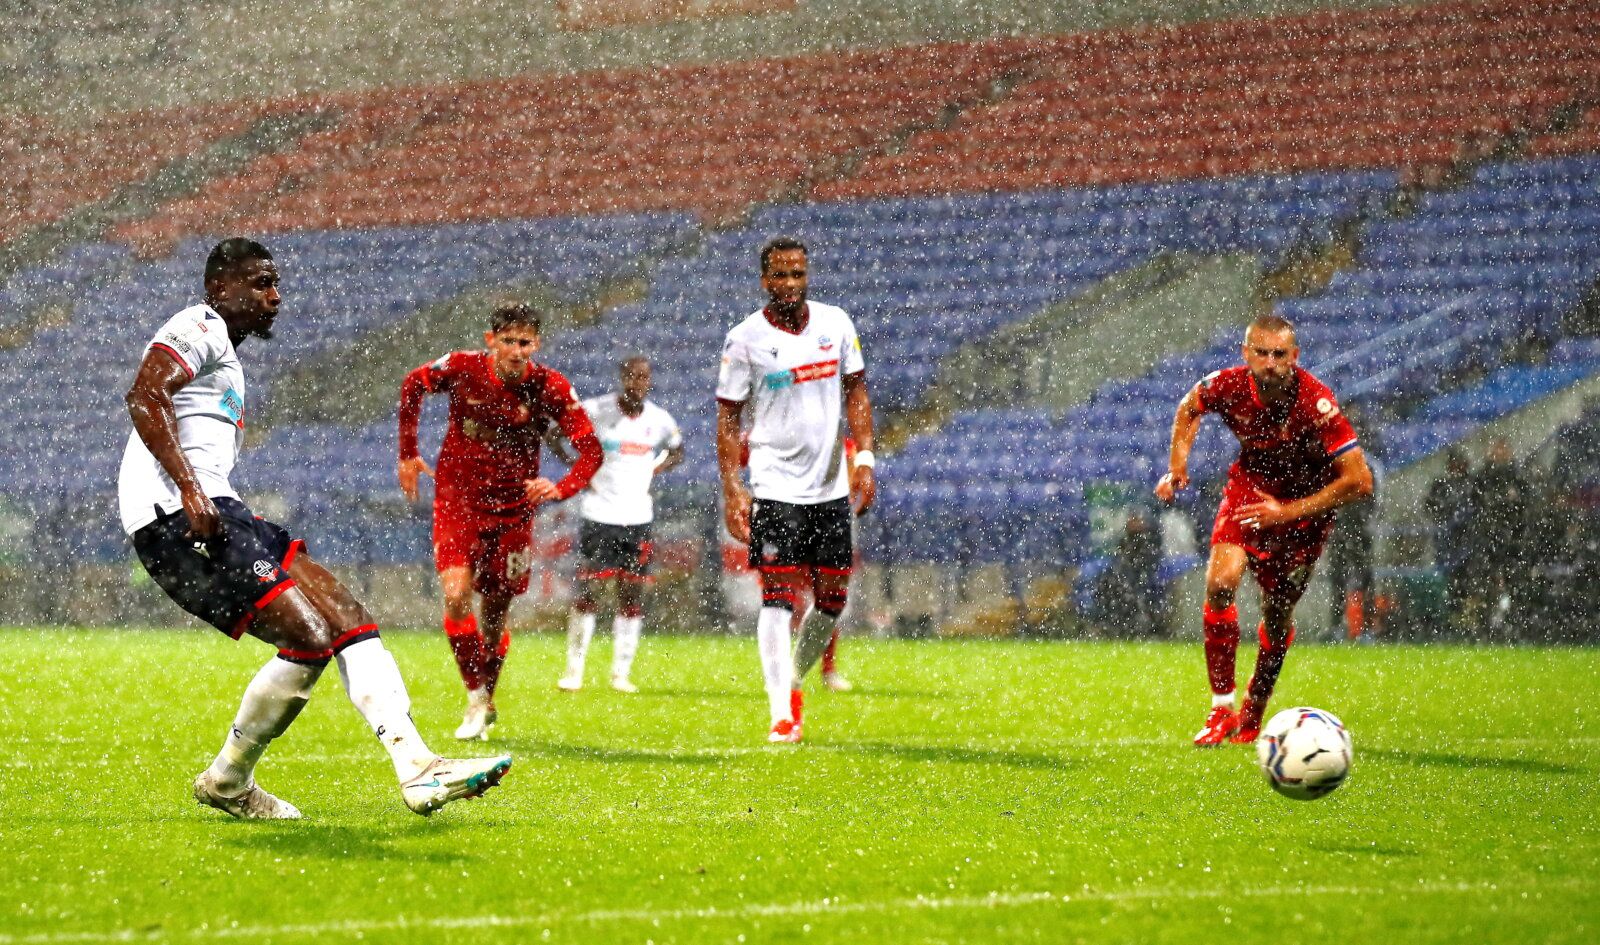 Soccer Football - EFL Trophy - Group Stage - Bolton Wanderers v Liverpool U21 - University of Bolton Stadium, Bolton, Britain - October 5, 2021  Bolton Wanderers' Amadou Bakayoko scores their fourth goal from the penalty spot  Action Images/Jason Cairnduff  EDITORIAL USE ONLY. No use with unauthorized audio, video, data, fixture lists, club/league logos or 